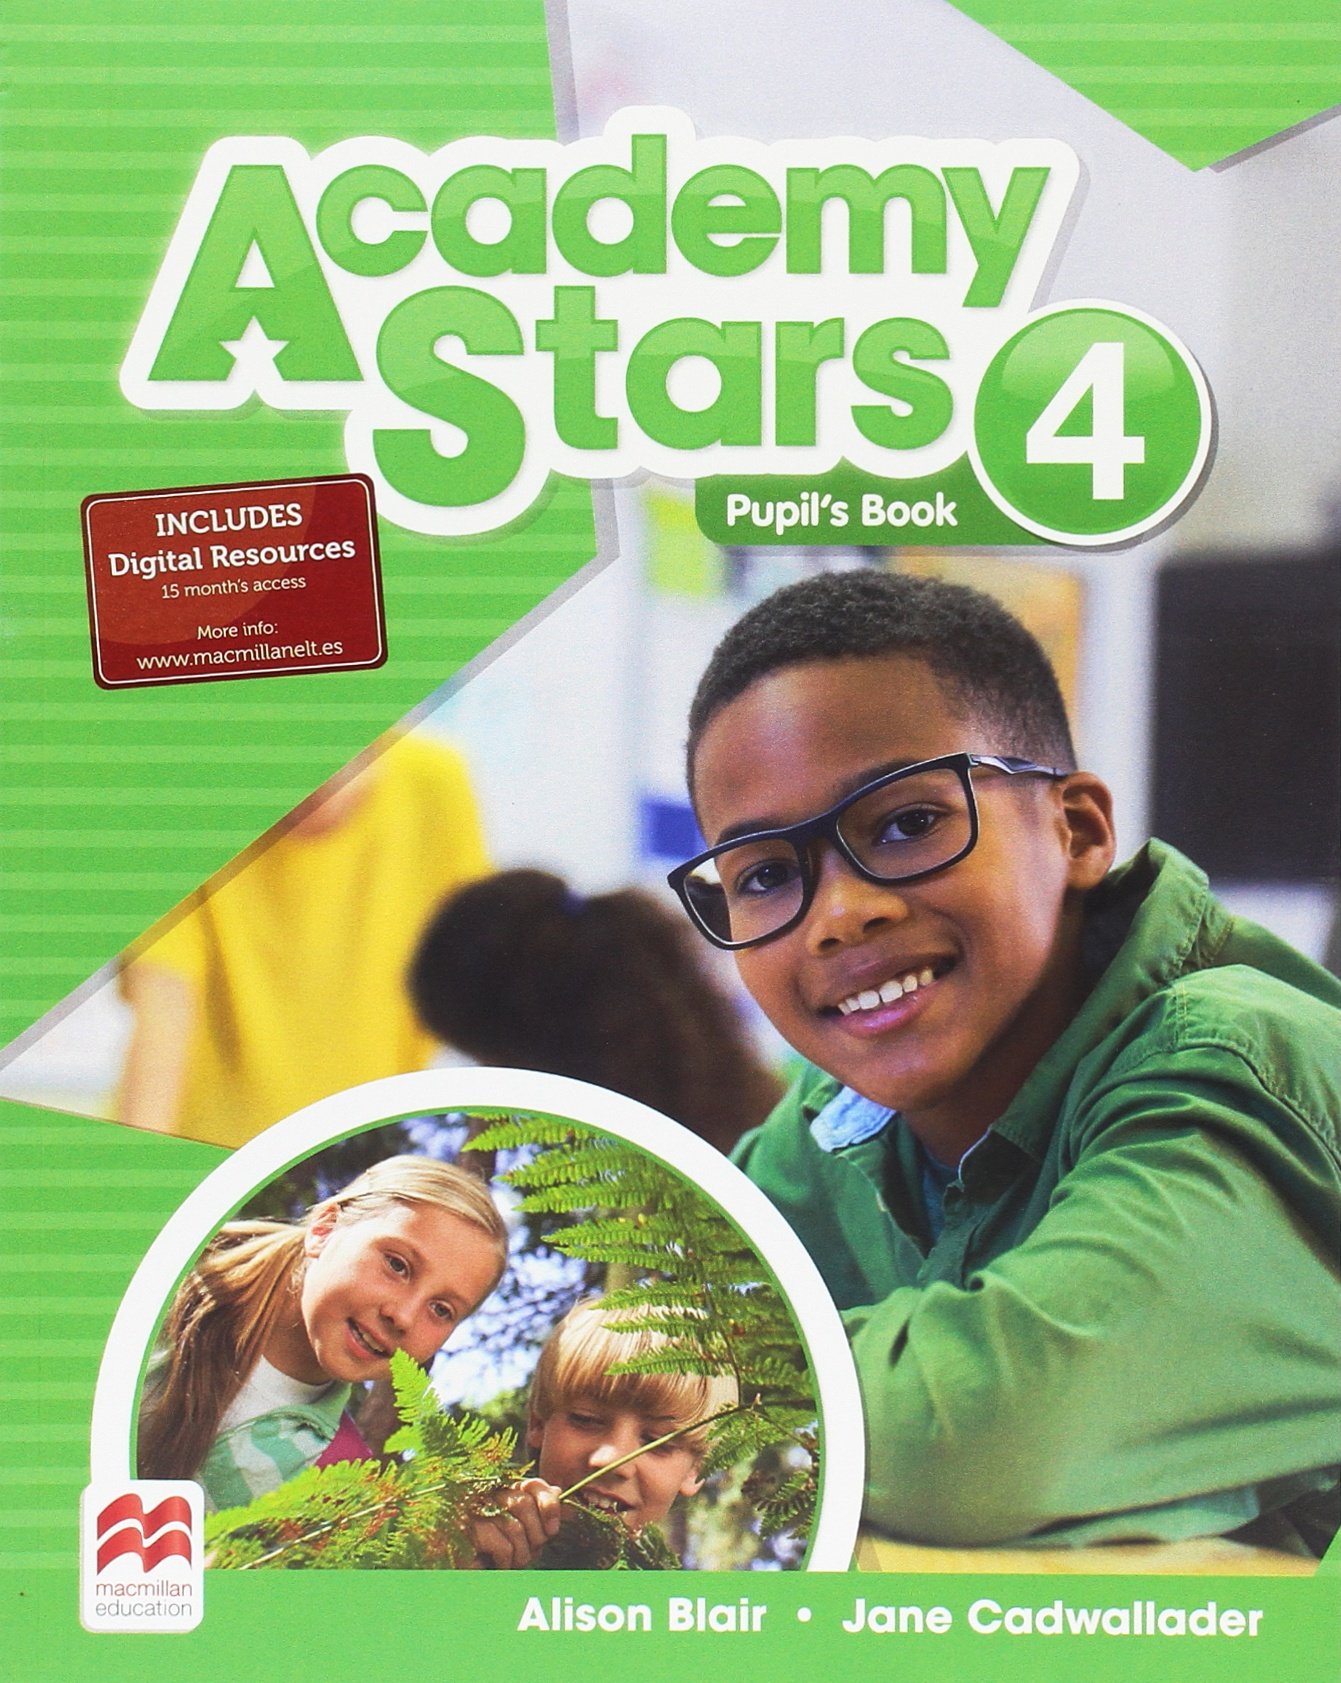 ACADEMY STARS 4 Pupil's Book Pack